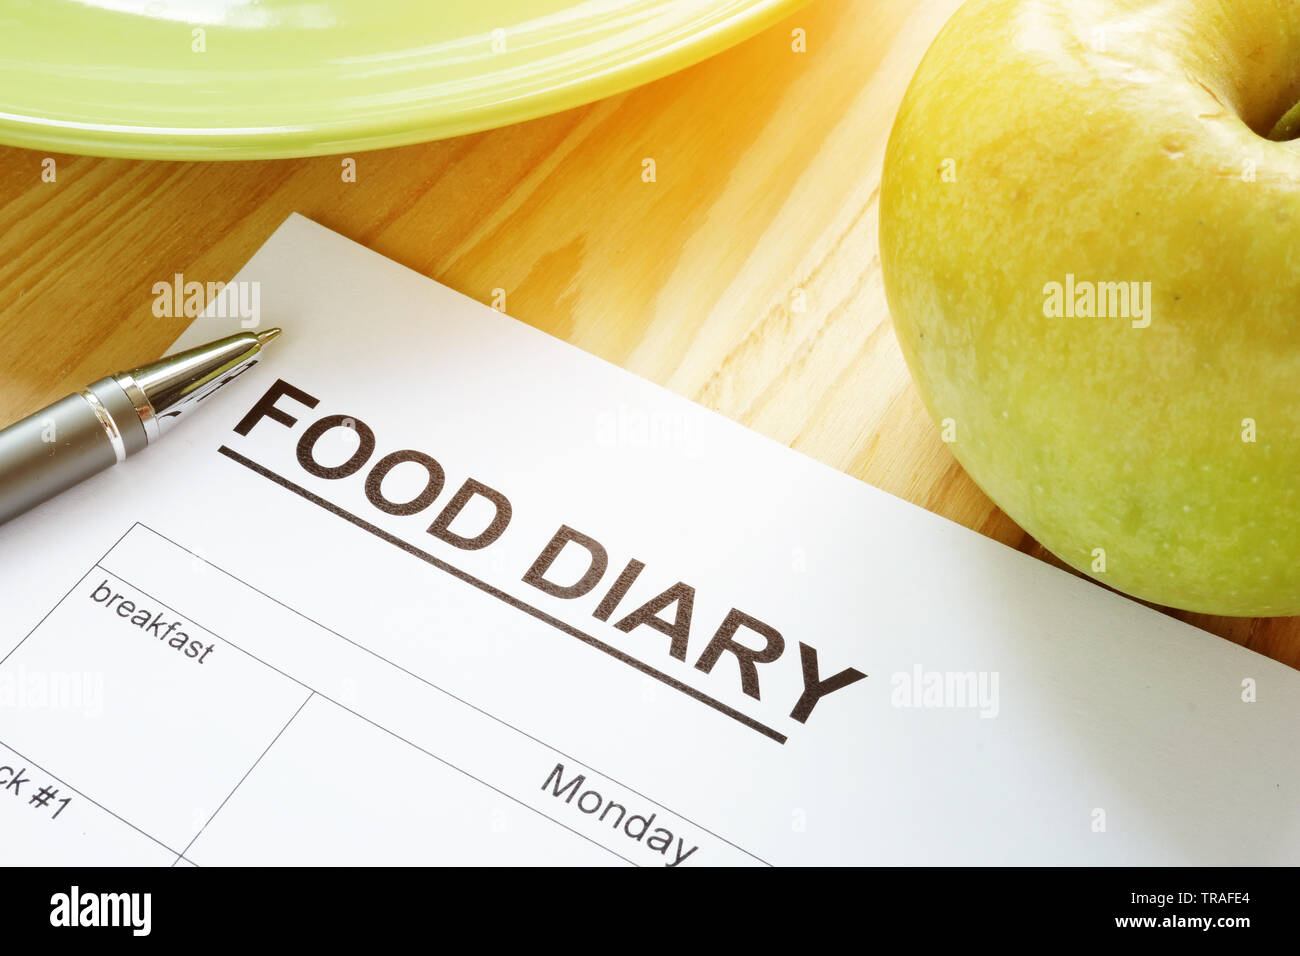 Food diary or meal plan and an apple. Stock Photo